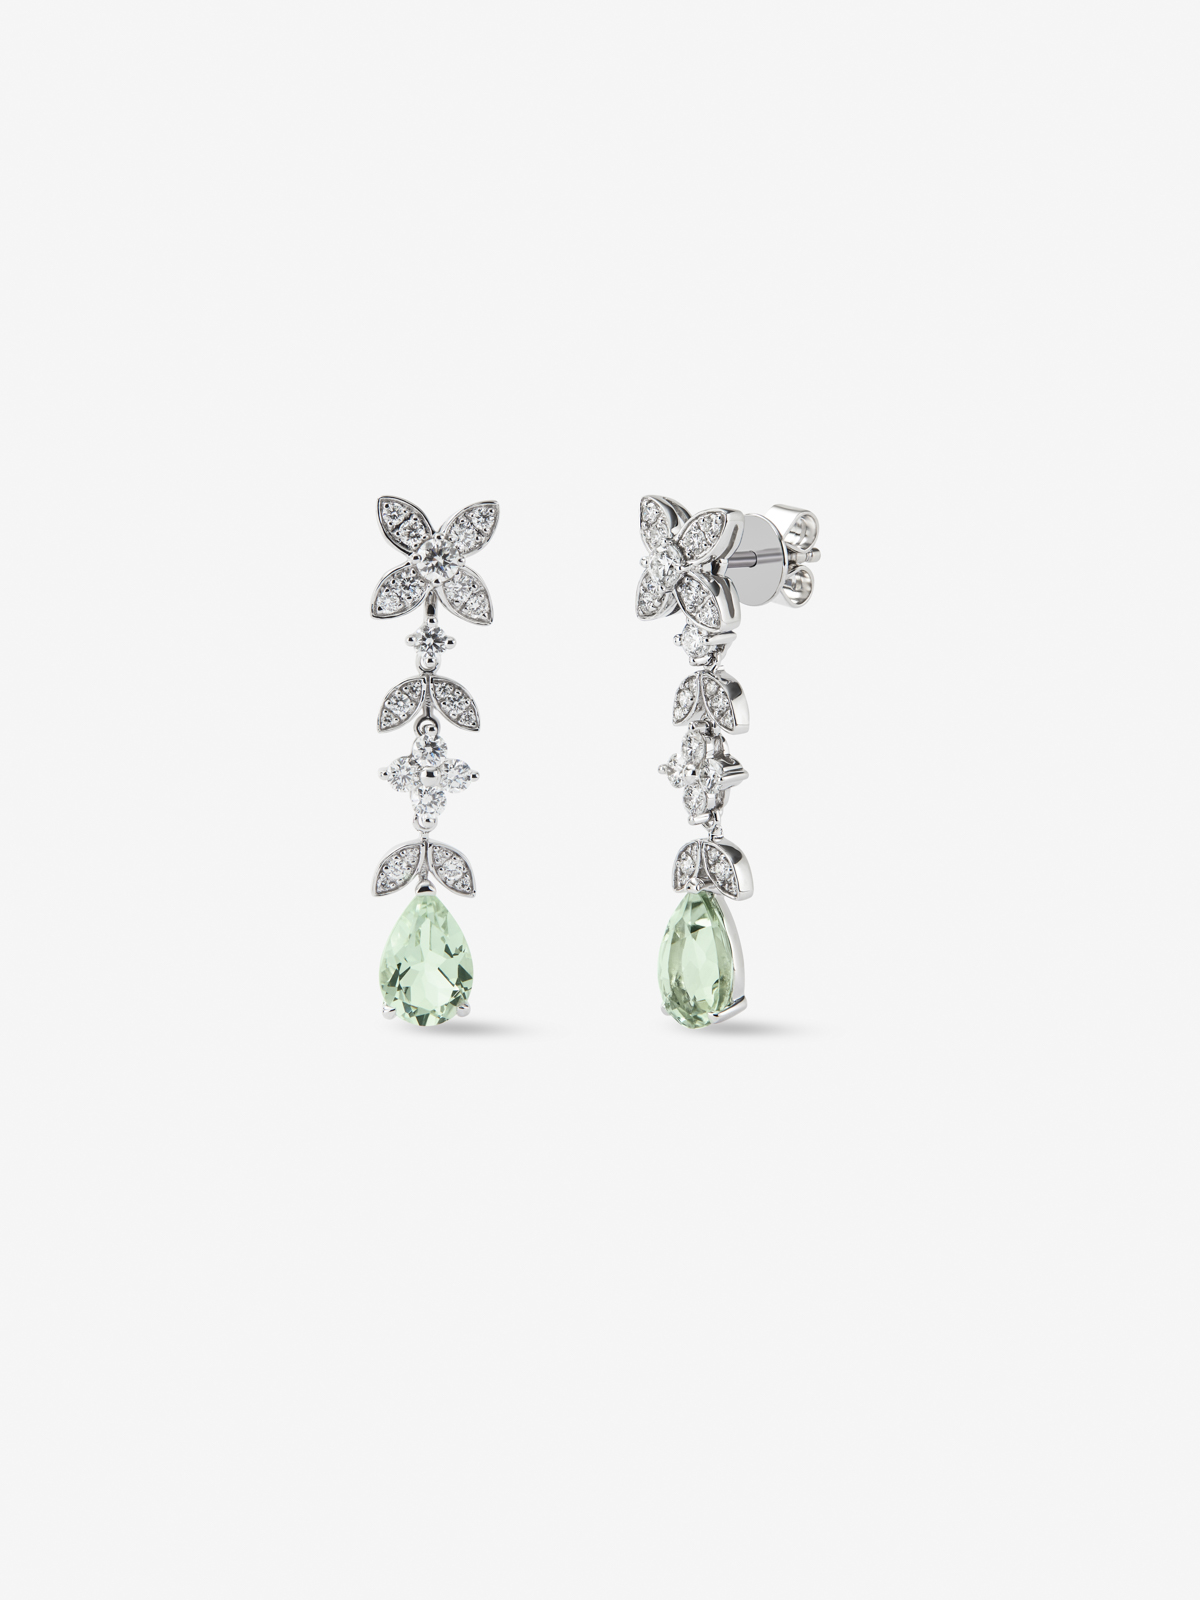 Detachable 18K white gold earrings with 0.99 ct brilliant-cut diamonds and pear-cut green amethysts